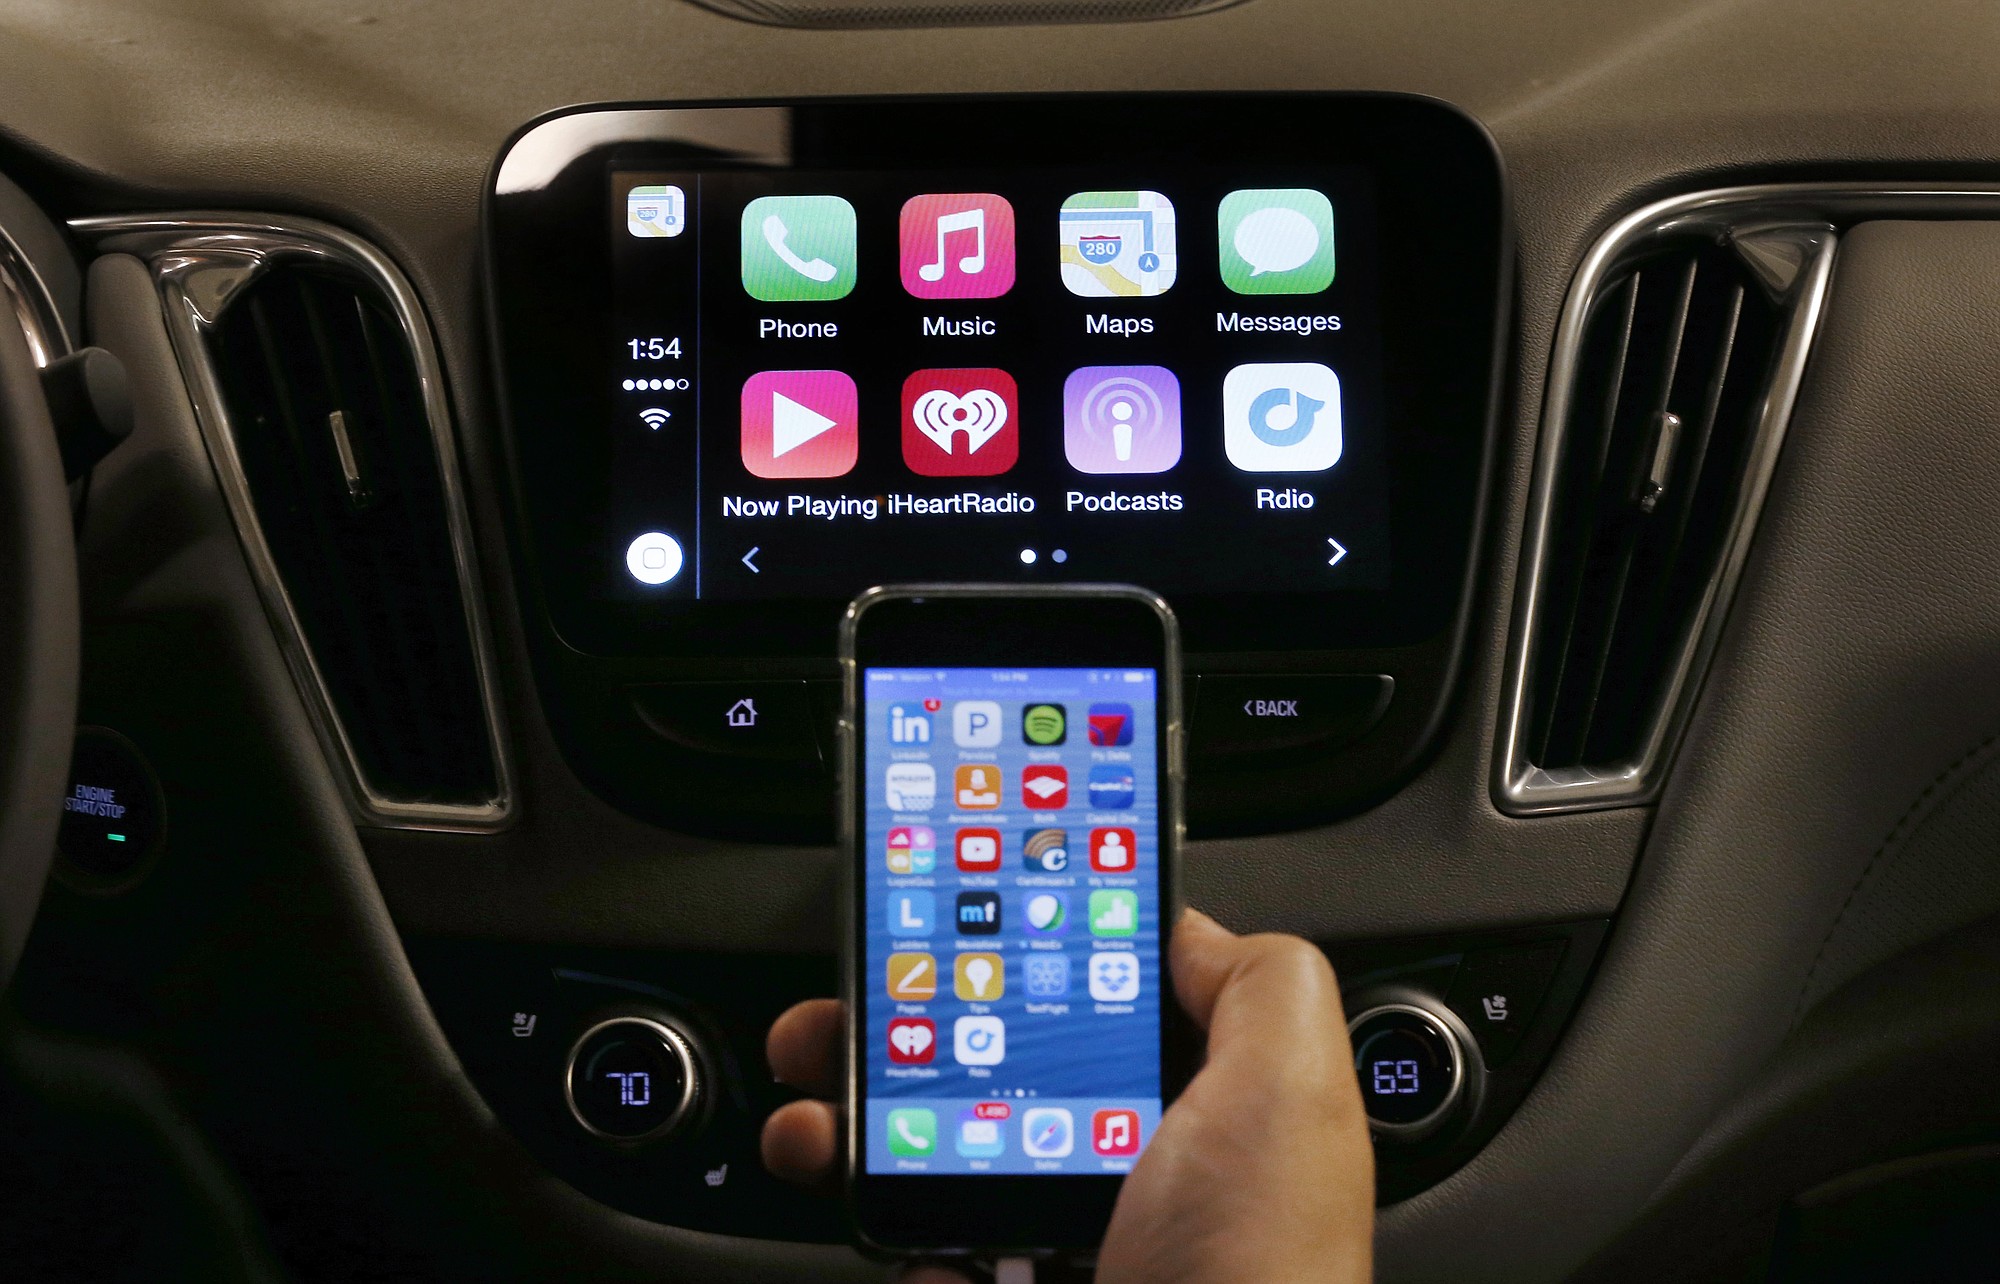 An iPhone is connected to a 2016 Chevrolet Malibu equipped with Apple CarPlay apps during a demonstration Tuesday in Detroit.